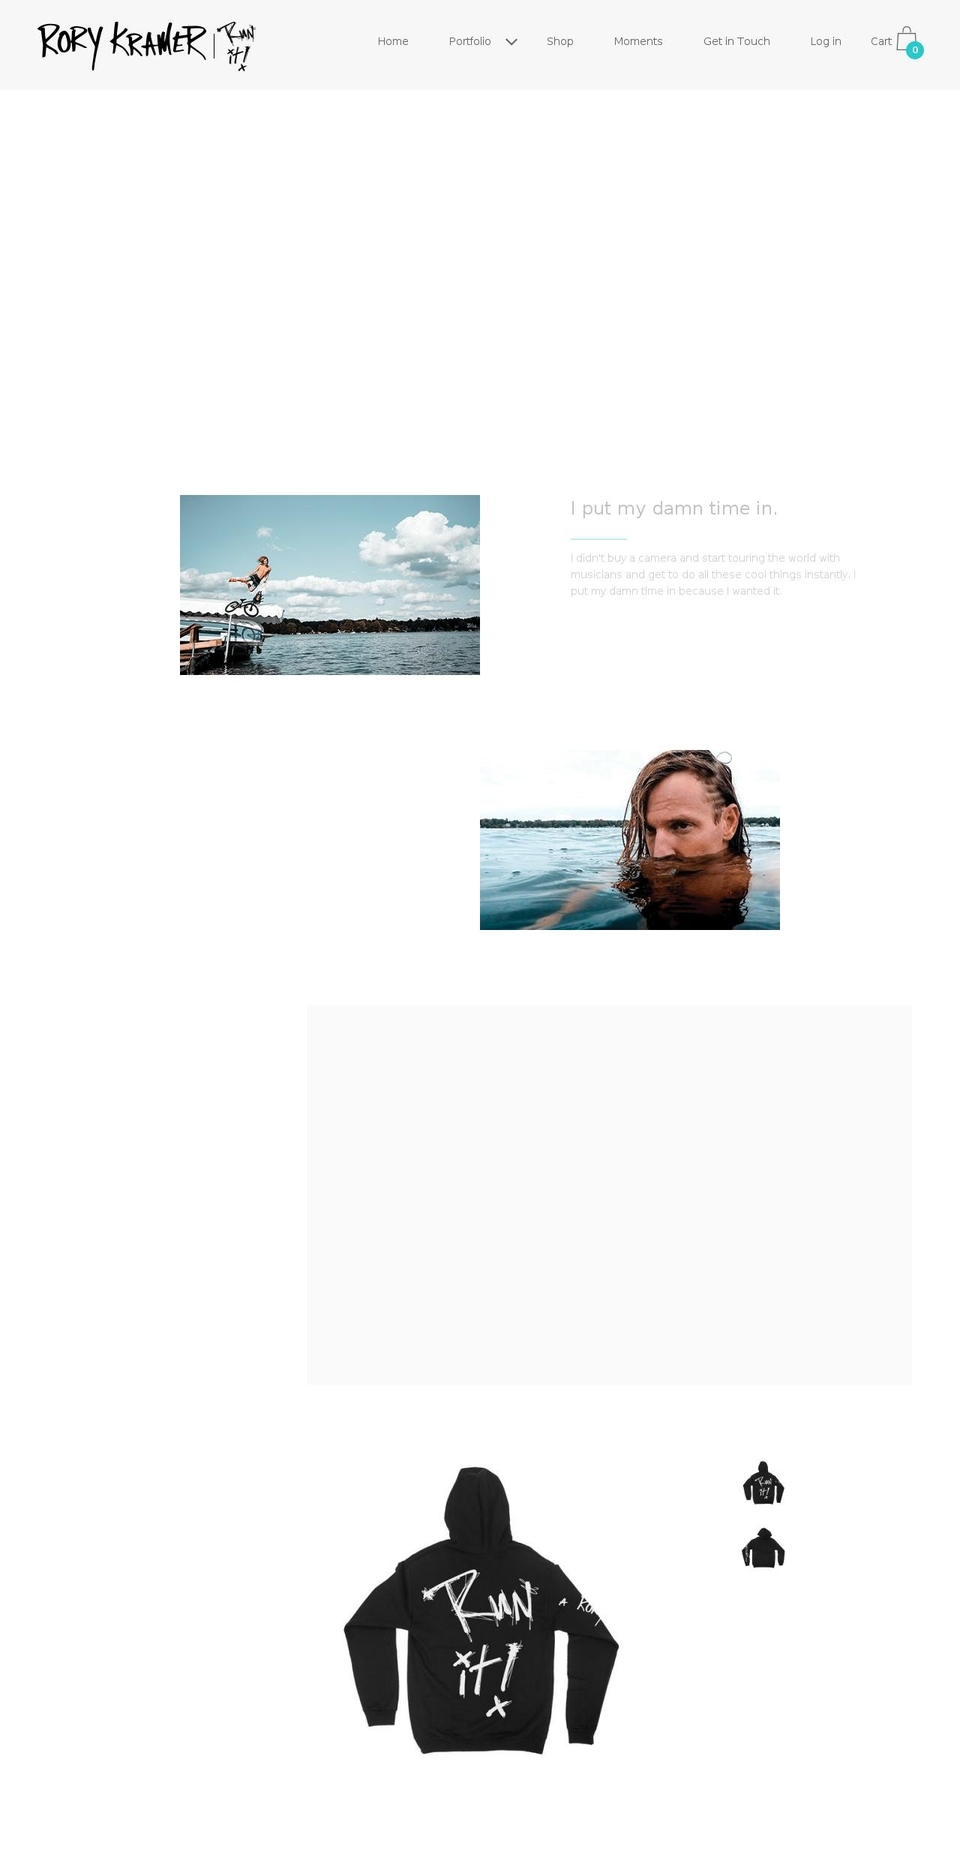 August Shopify theme site example rorykramer.myshopify.com